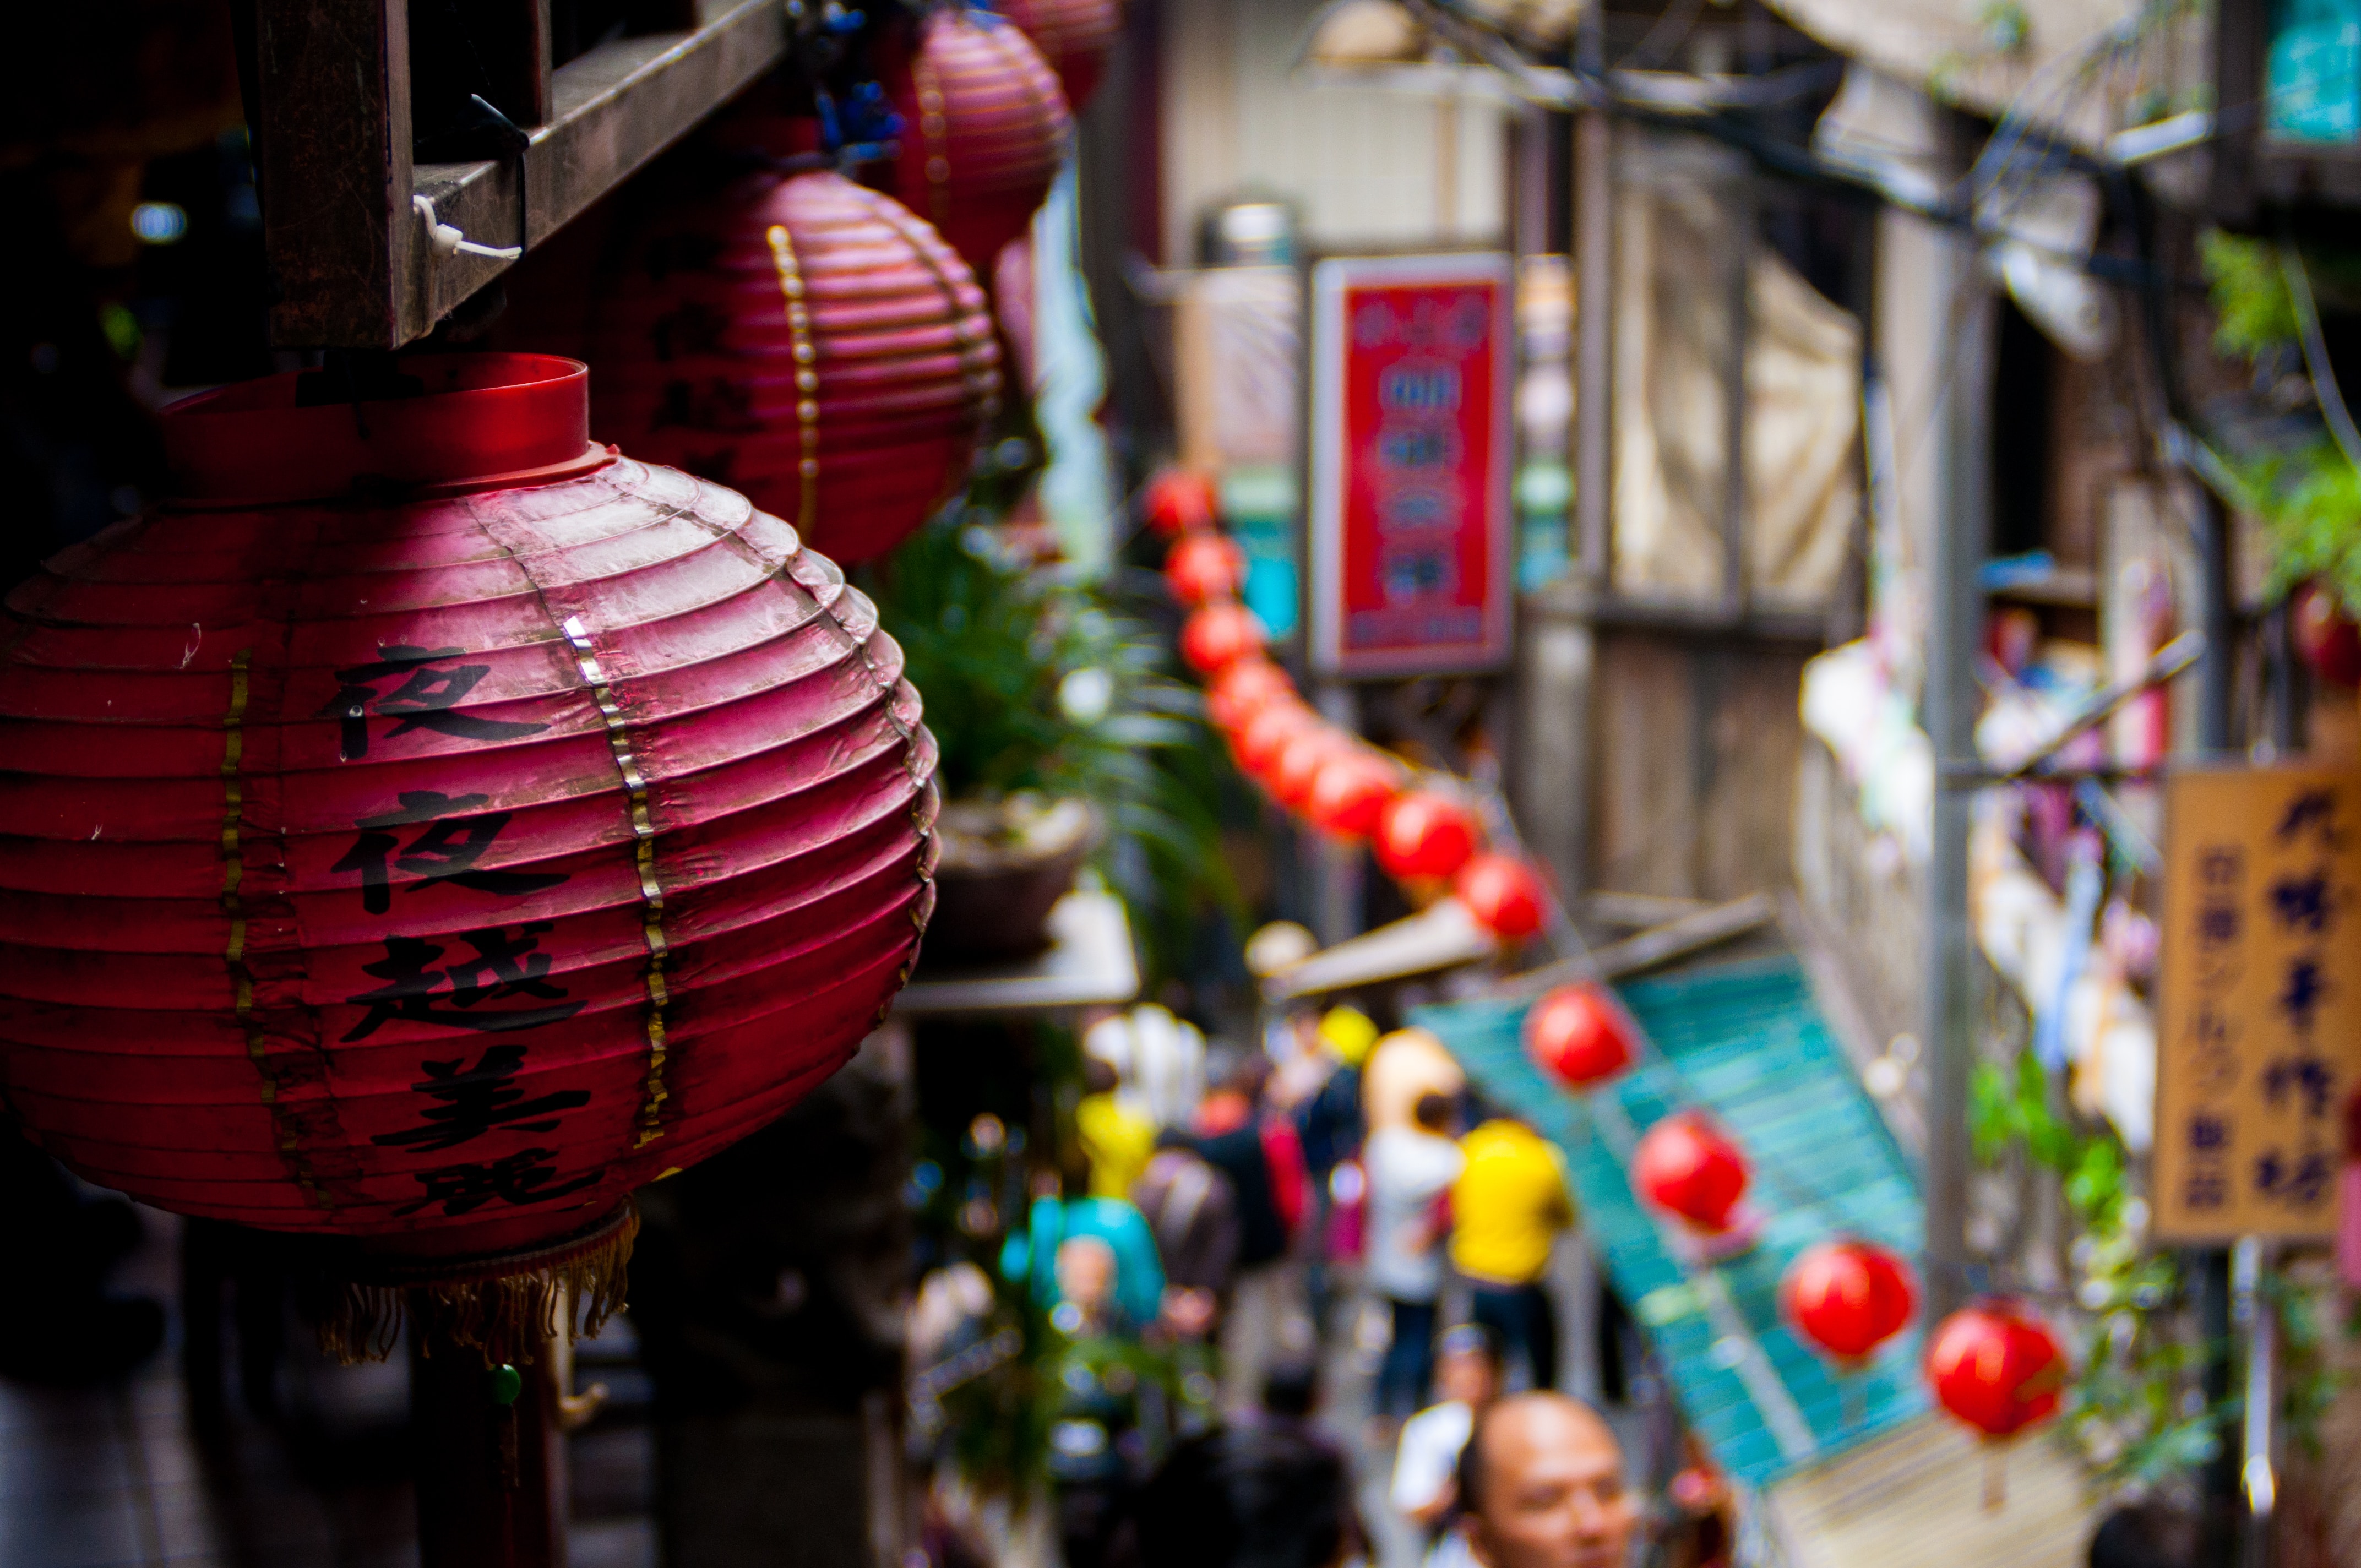 【Taipei Private Tour】Jiufen Travel Guide | Wandering around in Jiufen Old Street